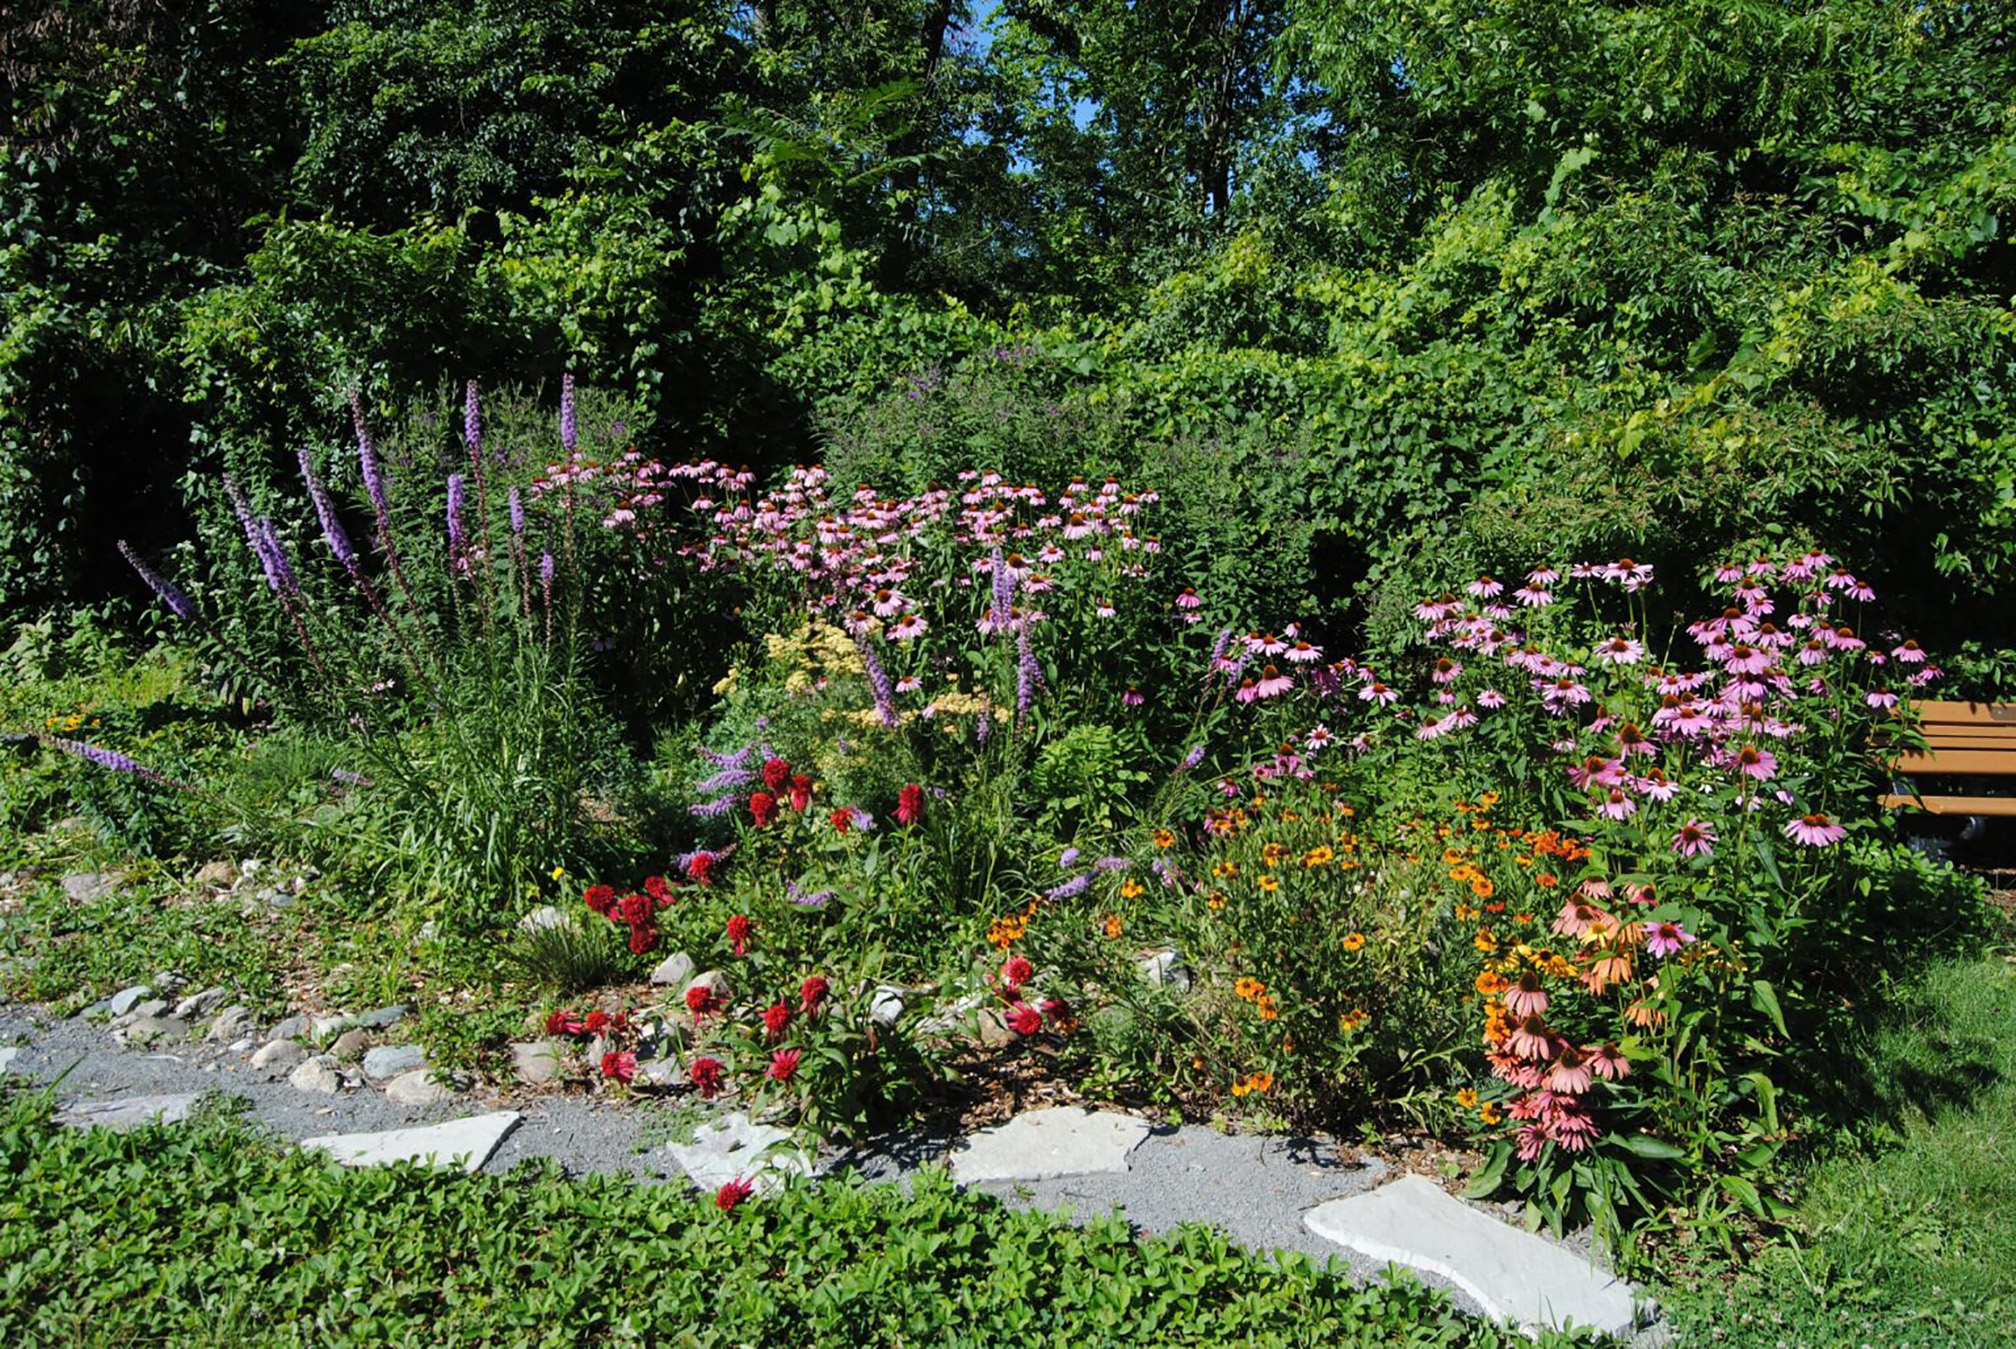 A small flower garden is full of color. Tall plants with purple flower spikes contrast with the mass of pink flowers behind. In the front, low plants with yellow, red, or pink flowers edge the gray paving of the path.